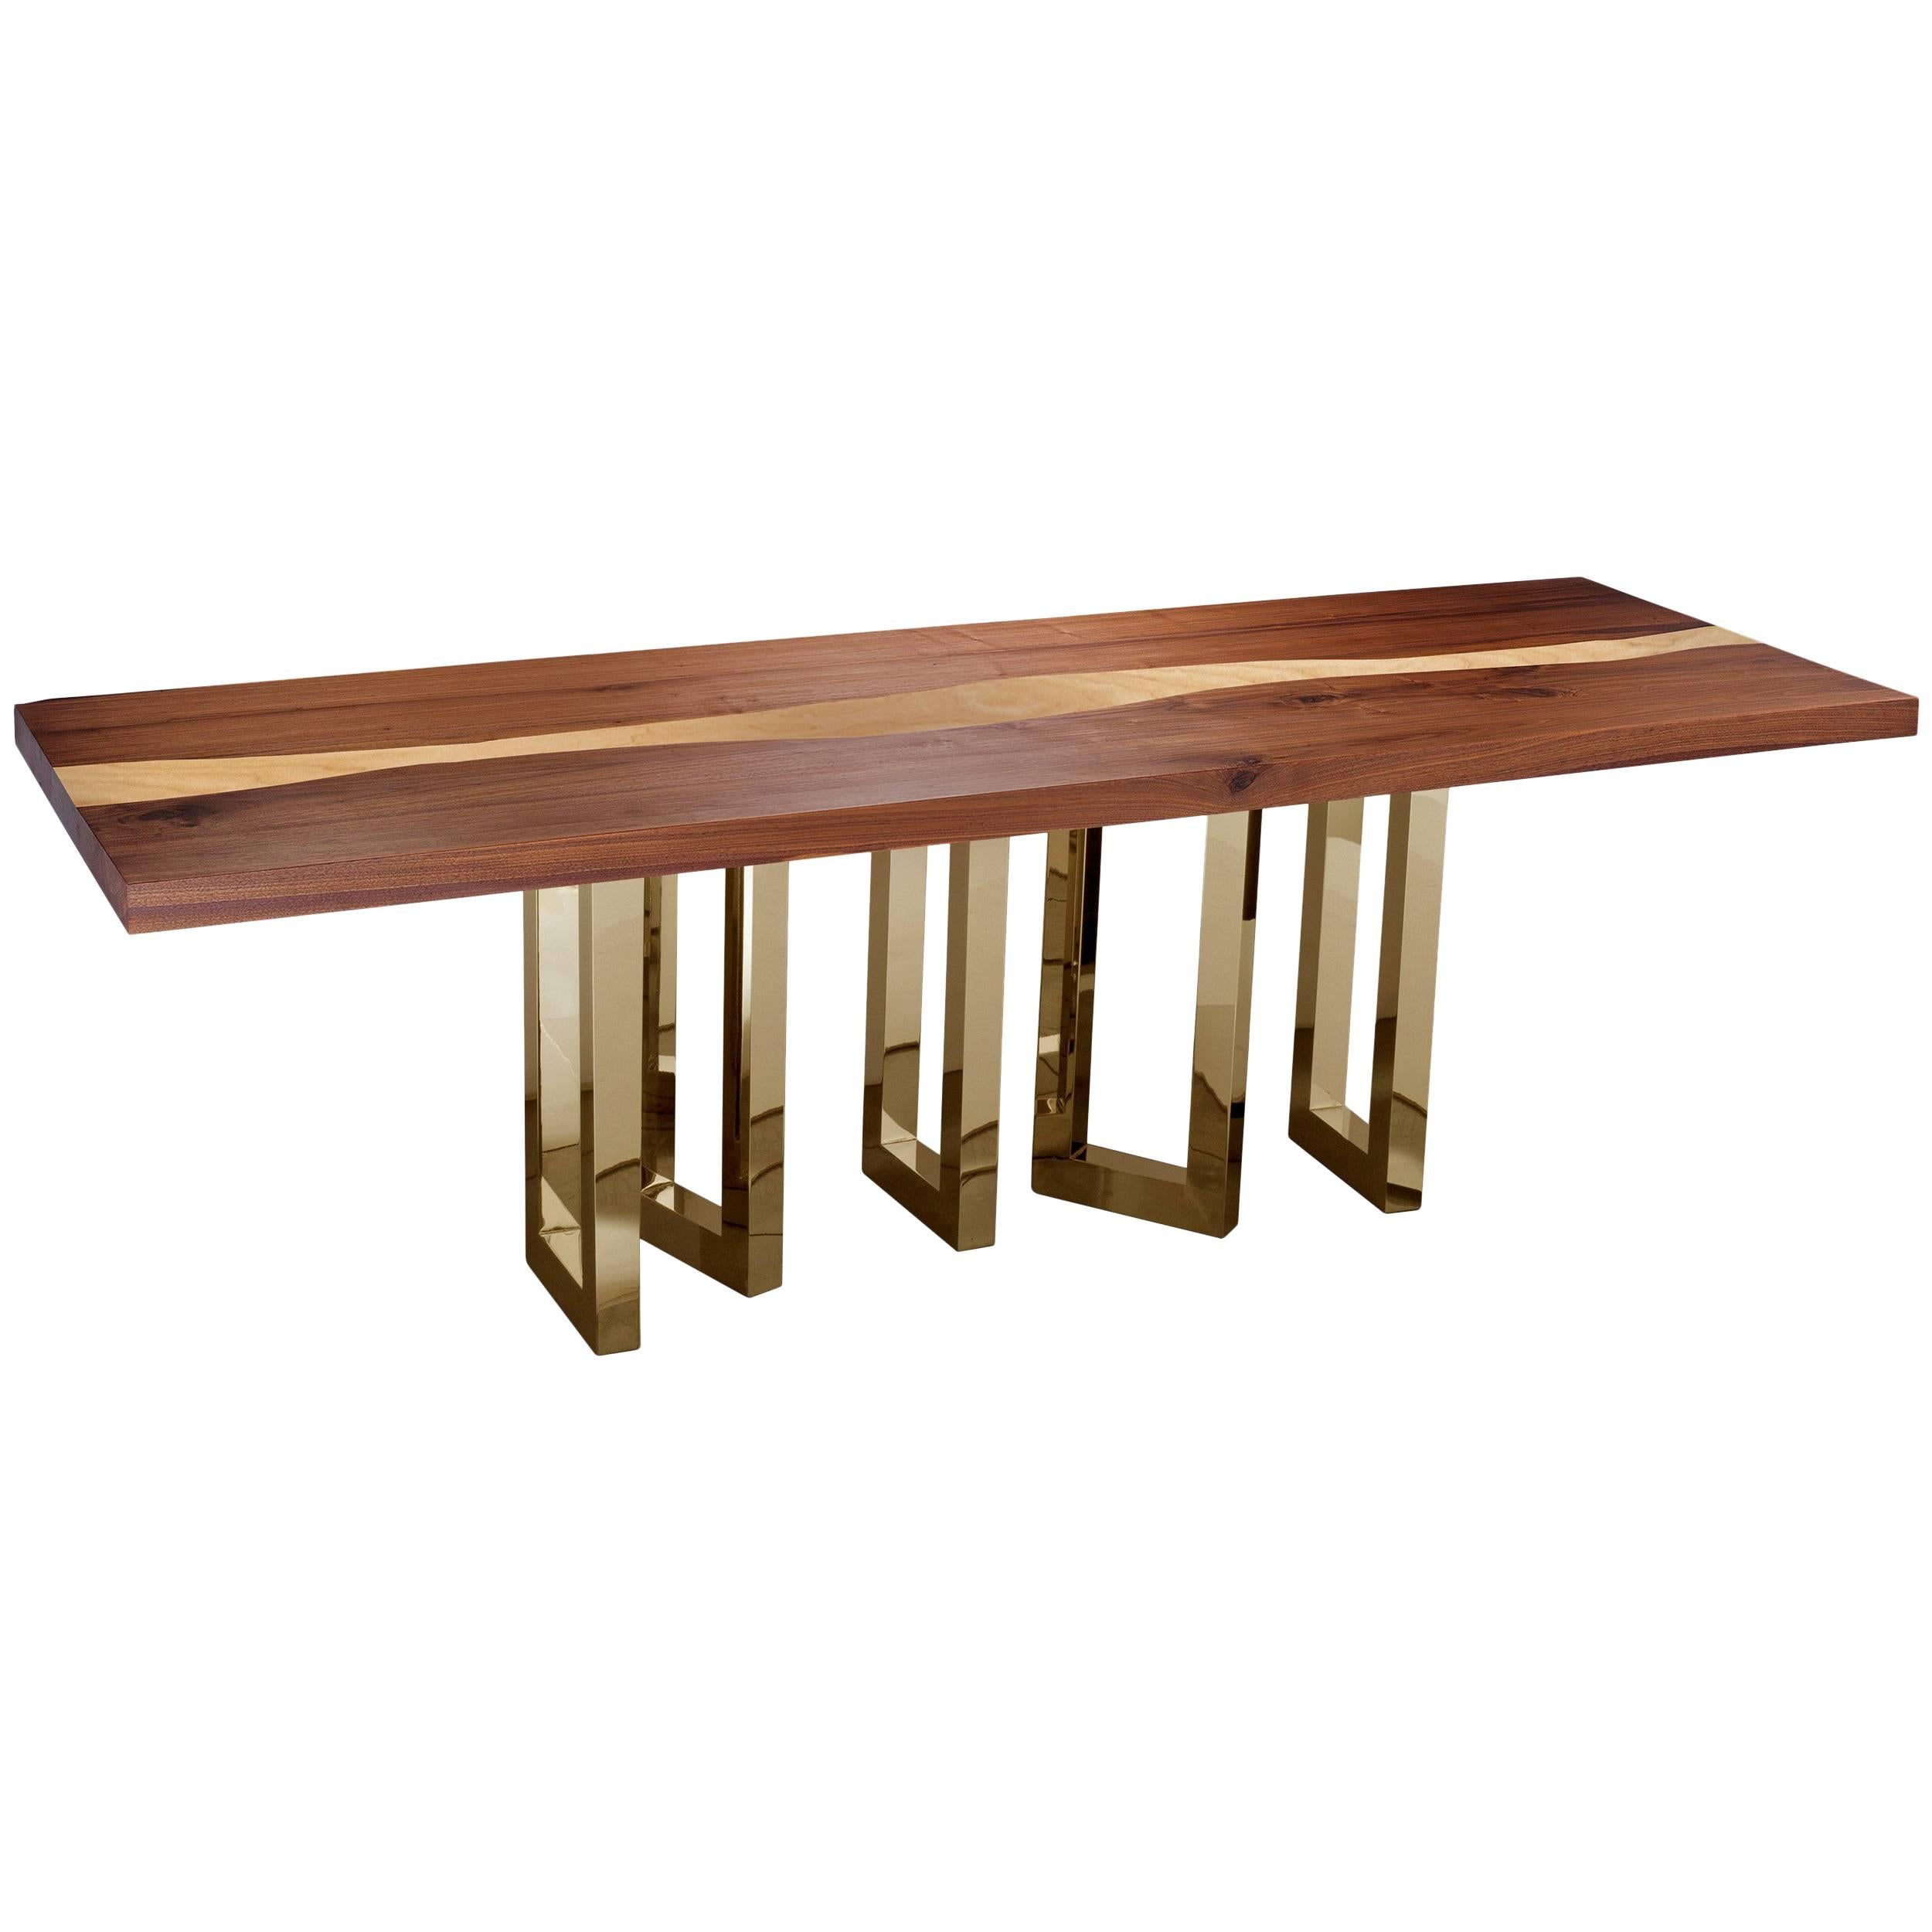 "Il Pezzo 6 Long Table" length 260cm/102.4” - solid walnut and ash - gold base For Sale